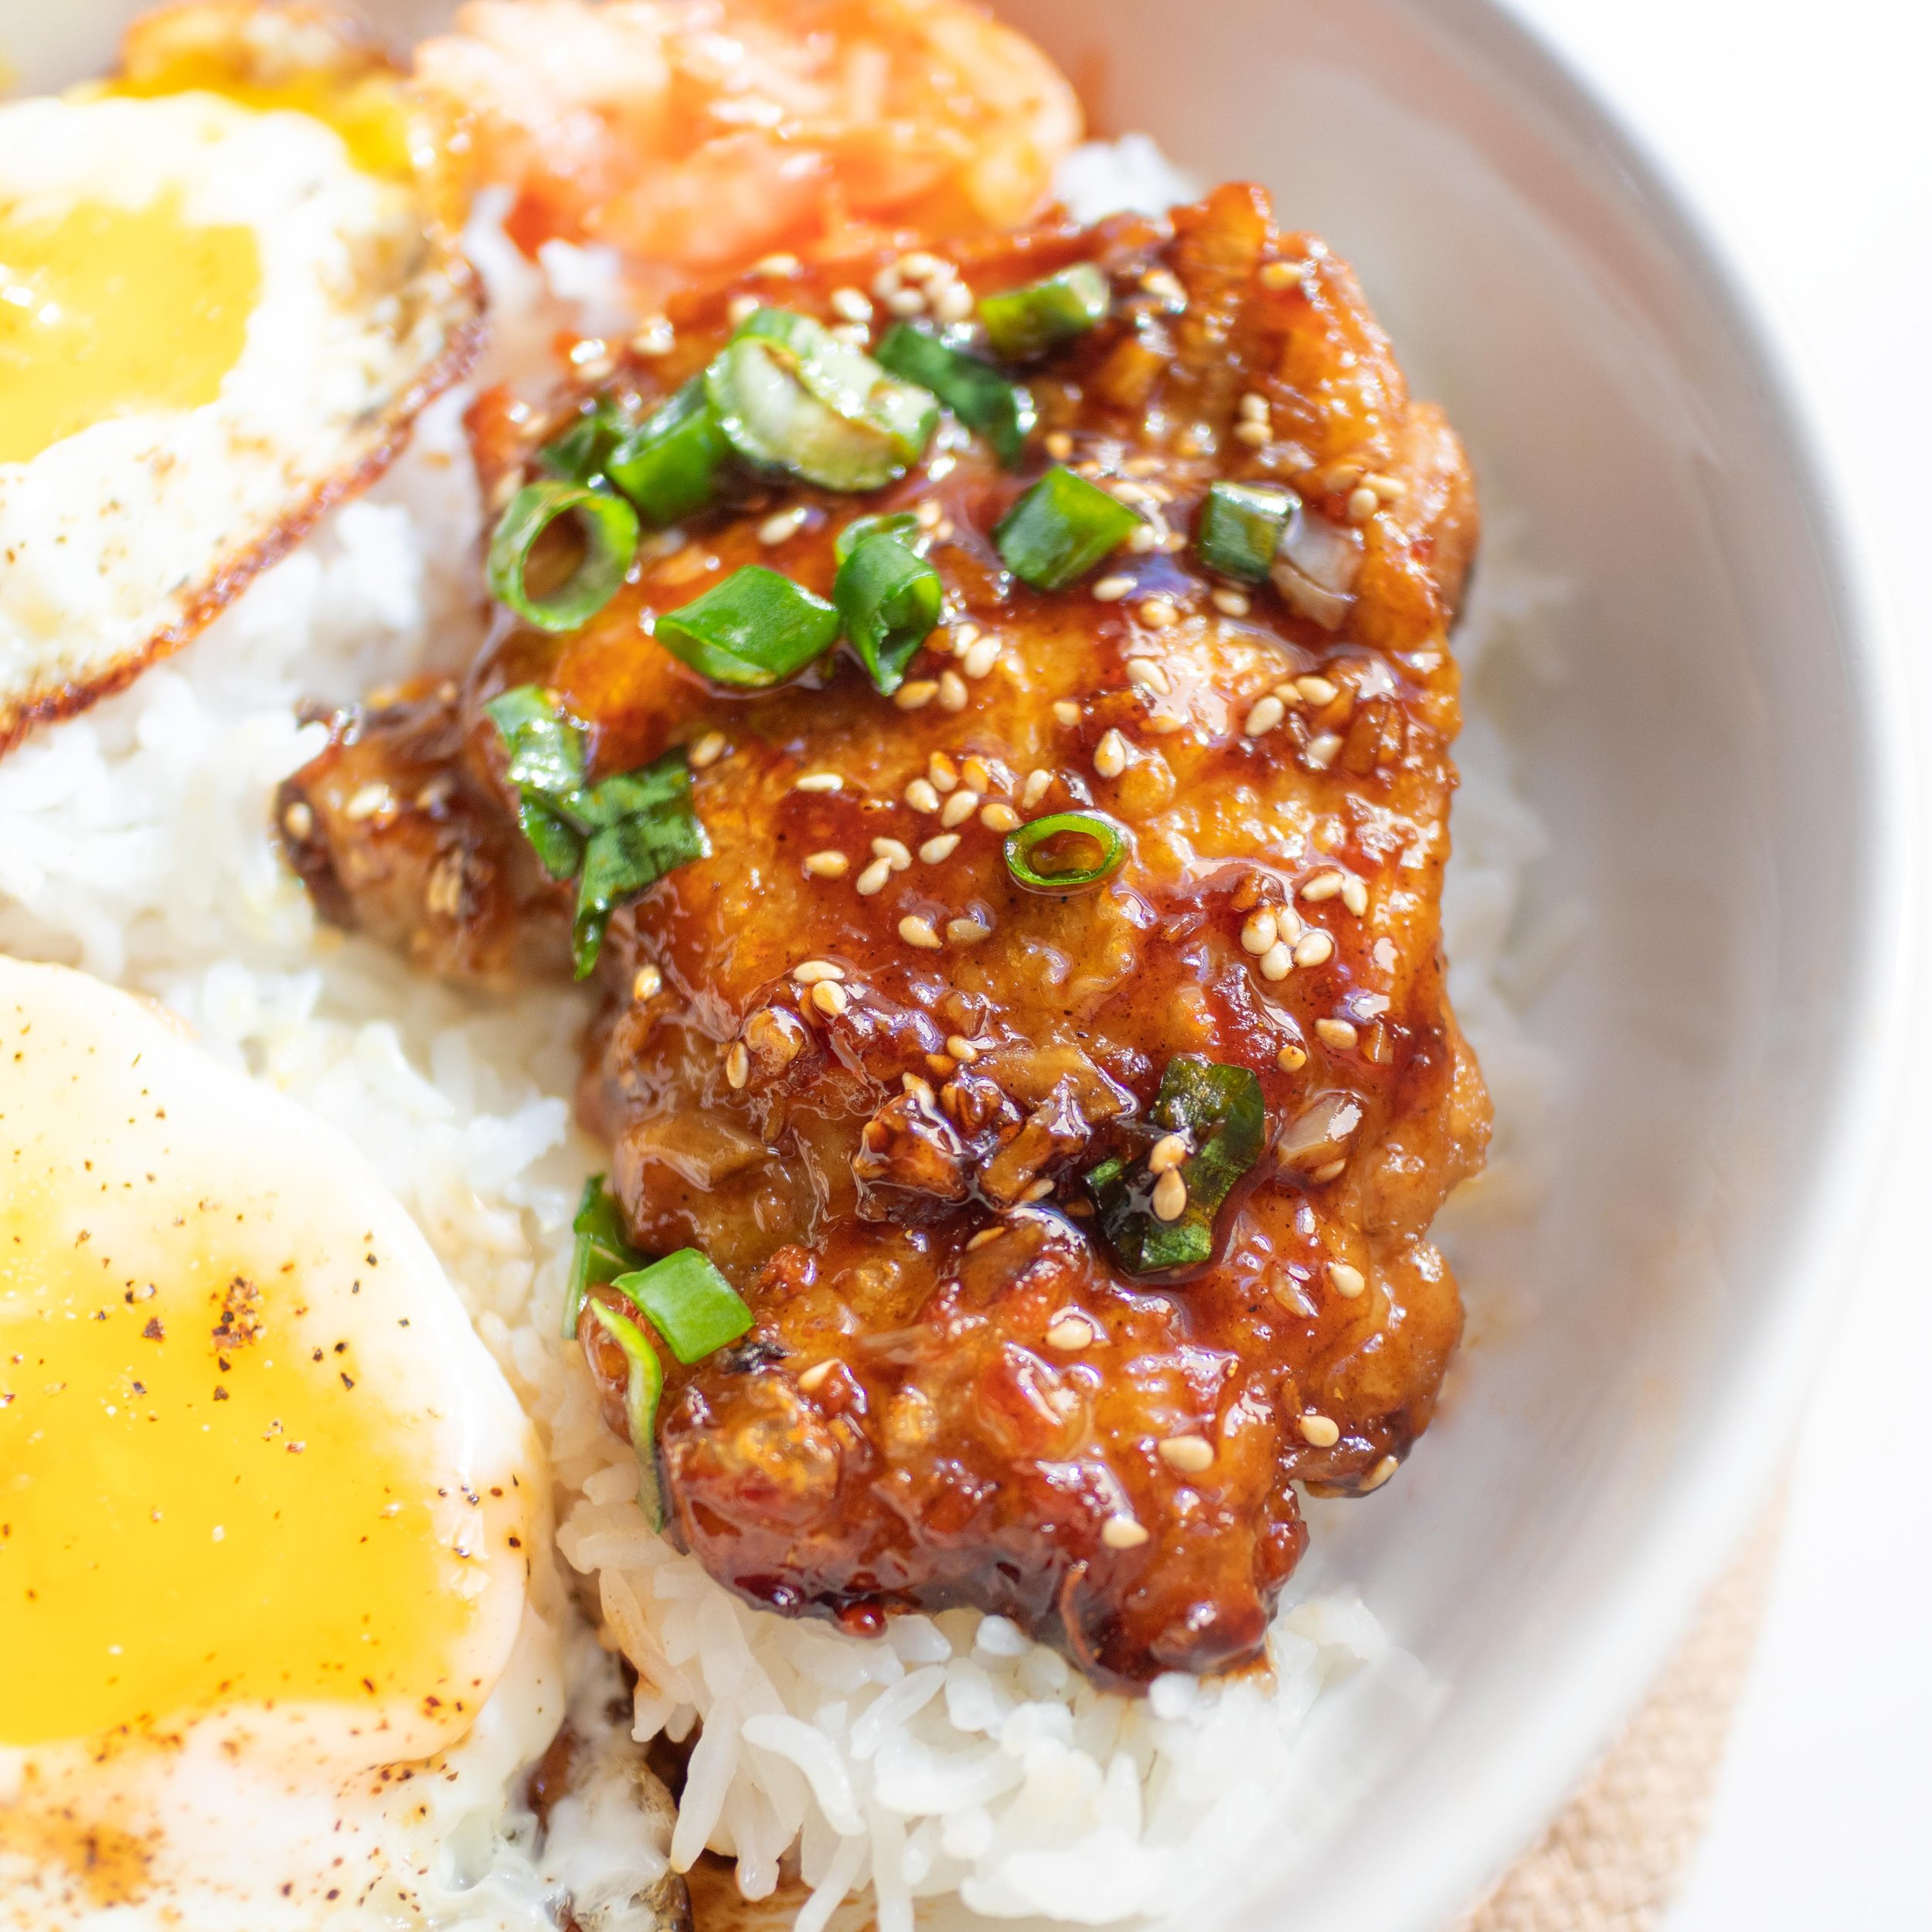 Easy pan-fried soy sauce glazed chicken served with steamed white rice, kimchi, and fried eggs